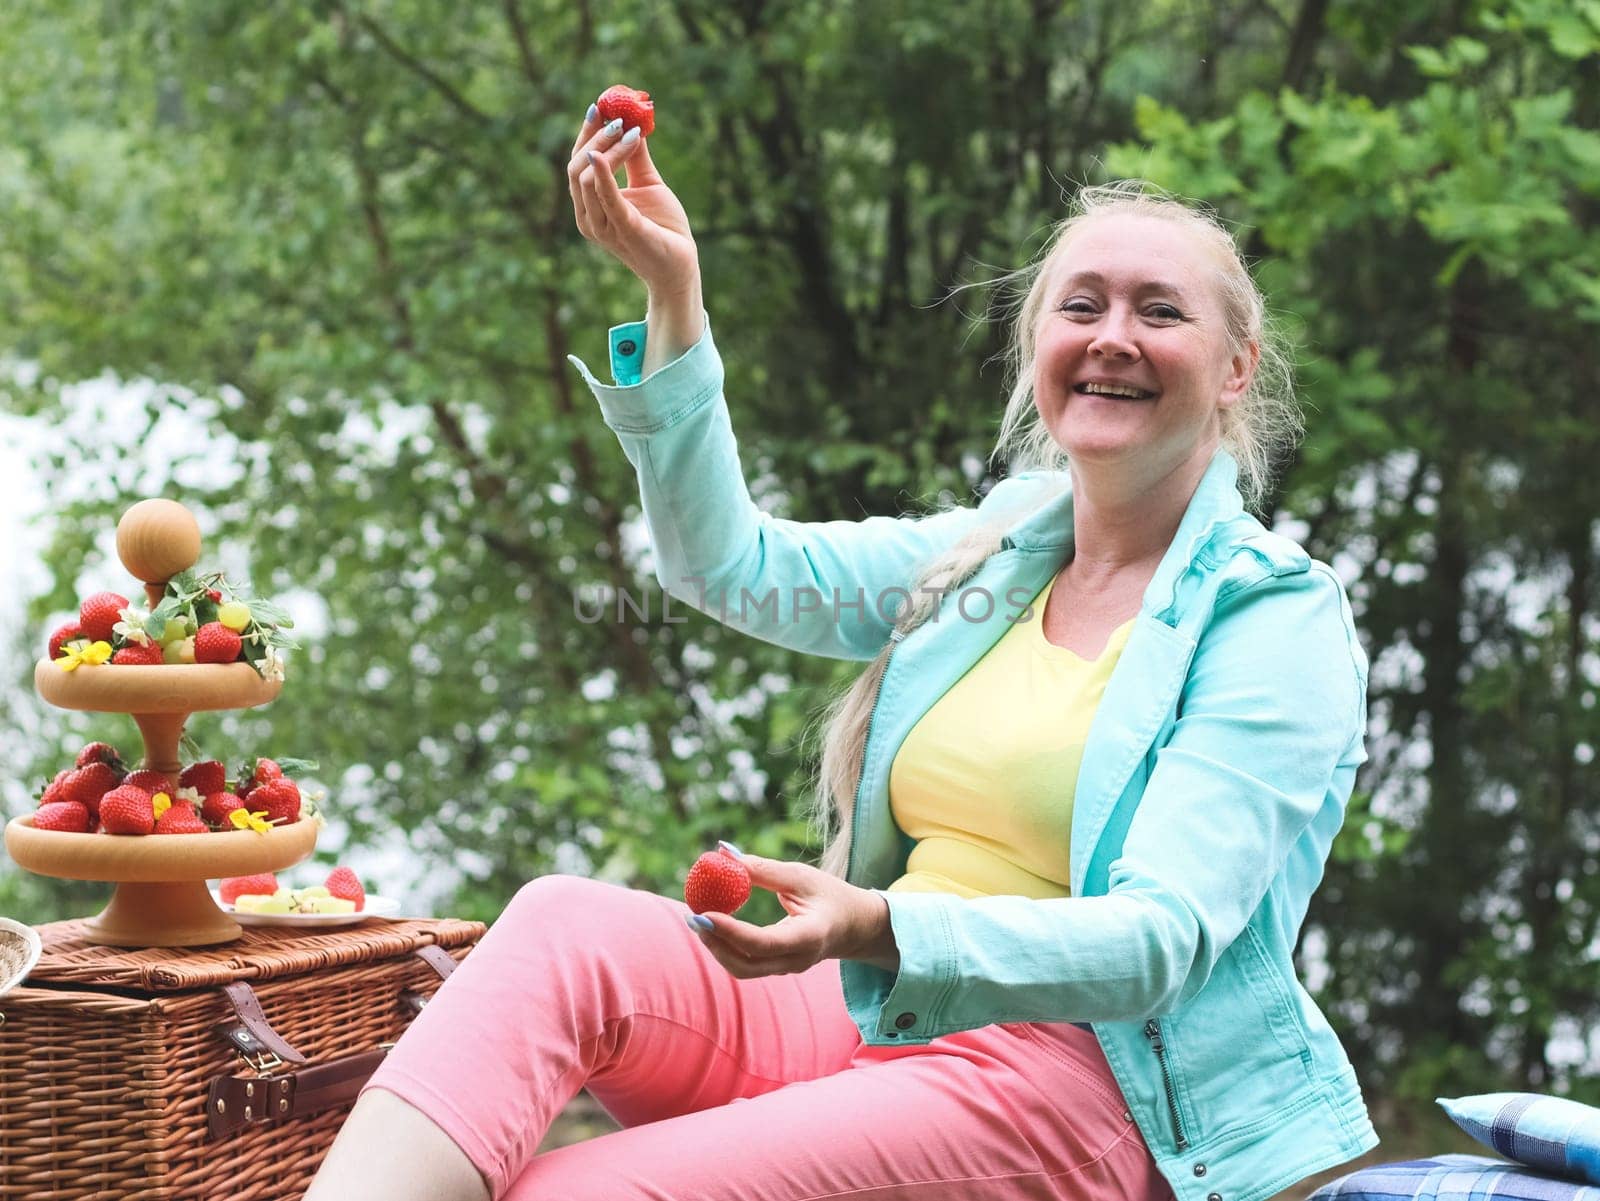 Portrait of a beautiful Caucasian cheerful middle-aged blonde woman, fooling around and having fun, eating ripe strawberries, sitting in a park on a bench on a spring day, close-up side view. Outdoor picnic concept, healthy eating and lifestyle.